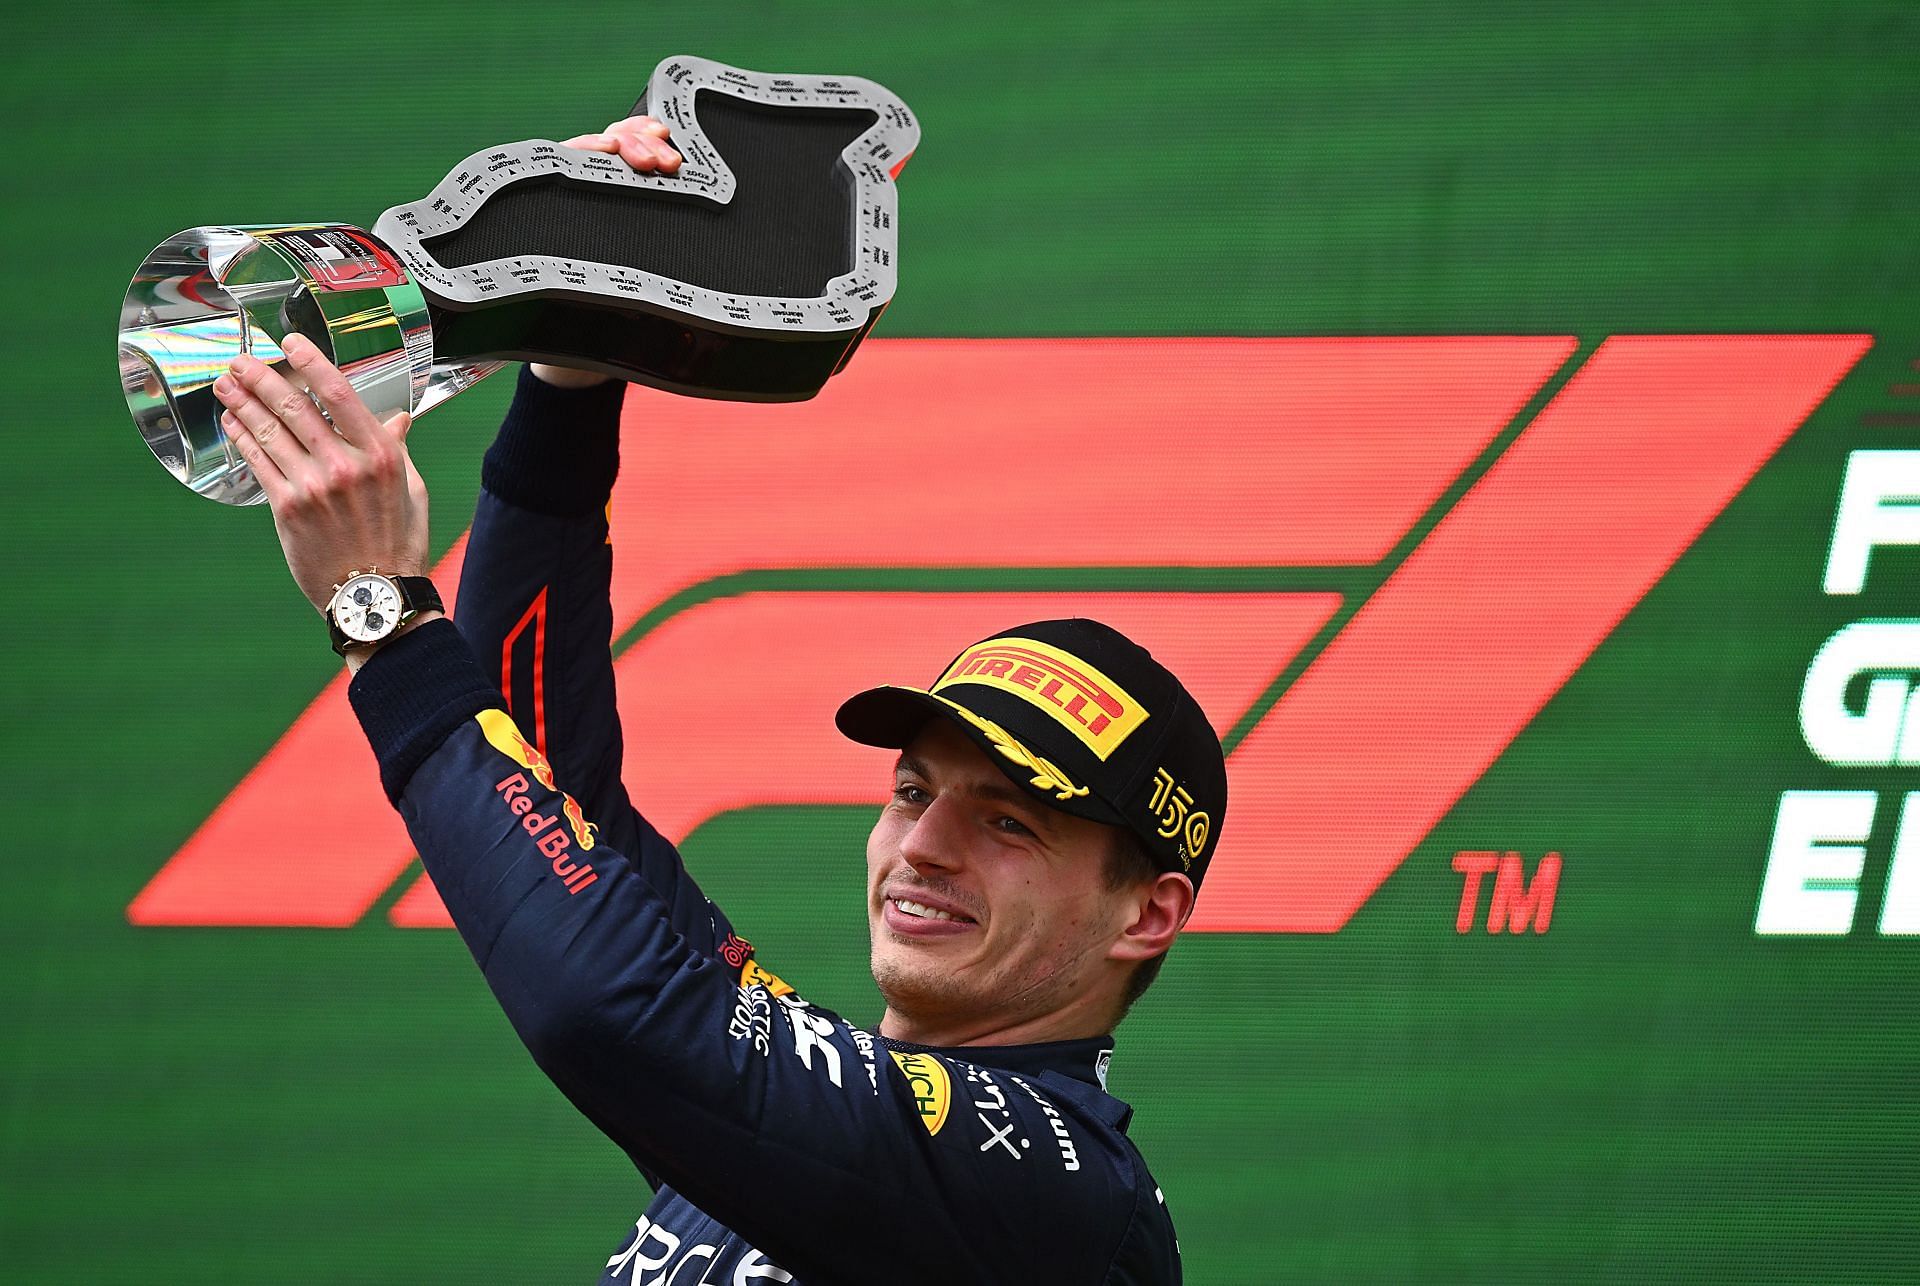 F1 News: Max Verstappen was in a league of his own in Imola, claims ...